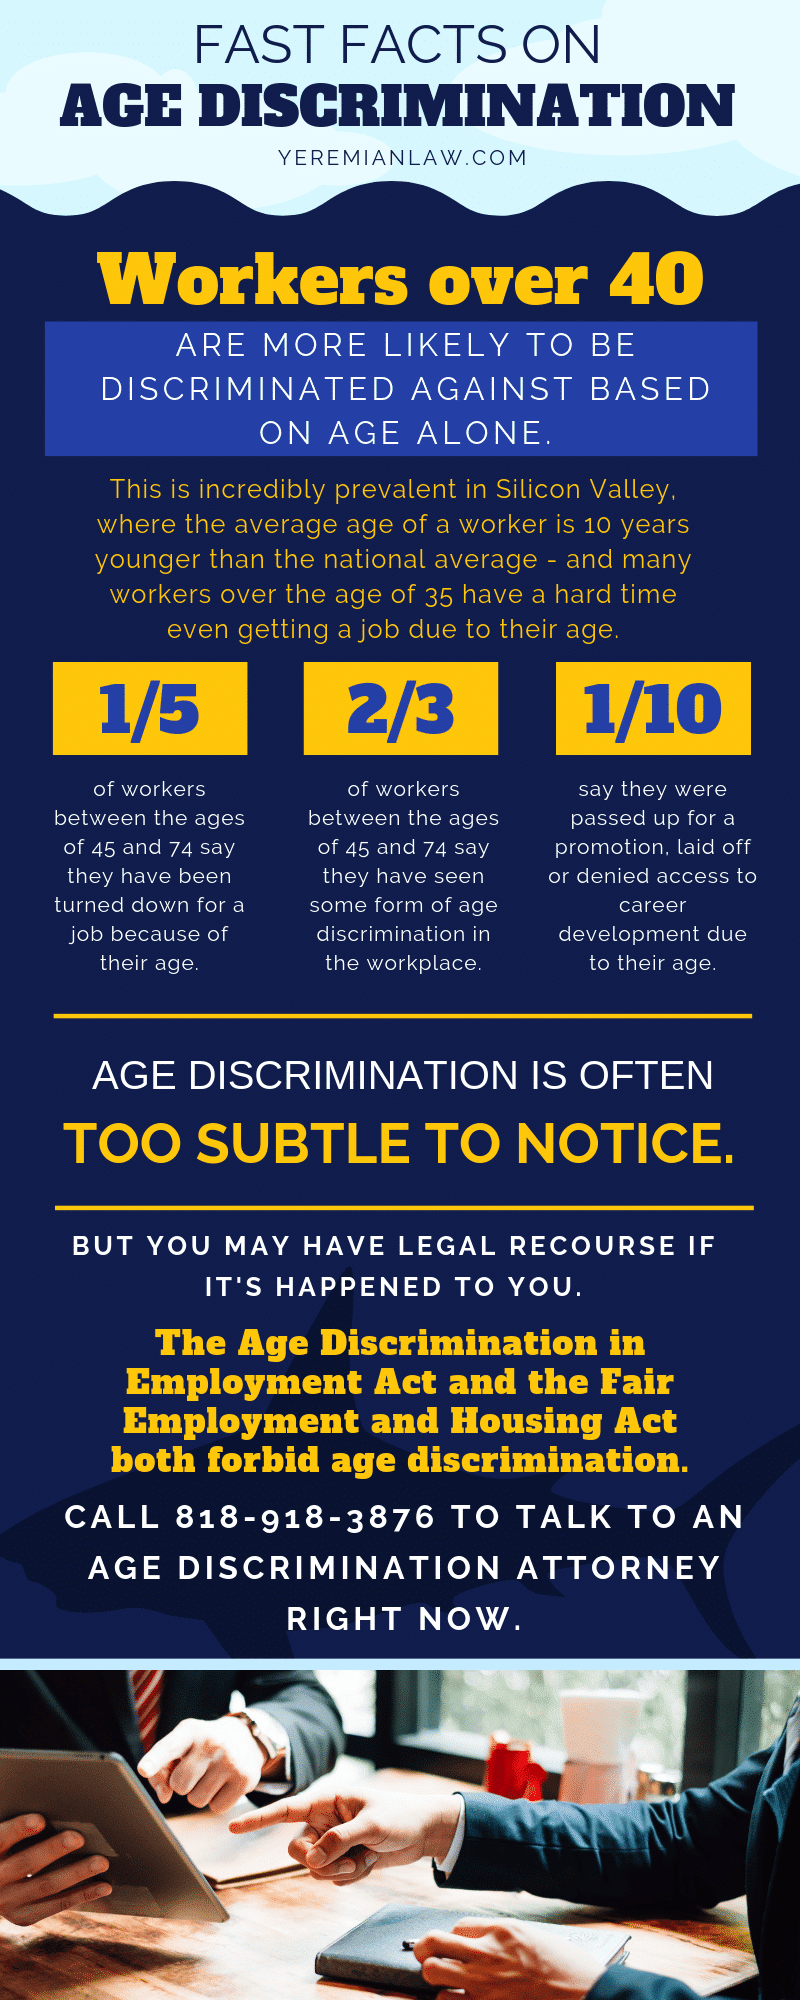 Fast Facts on Age Discrimination in the Workplace